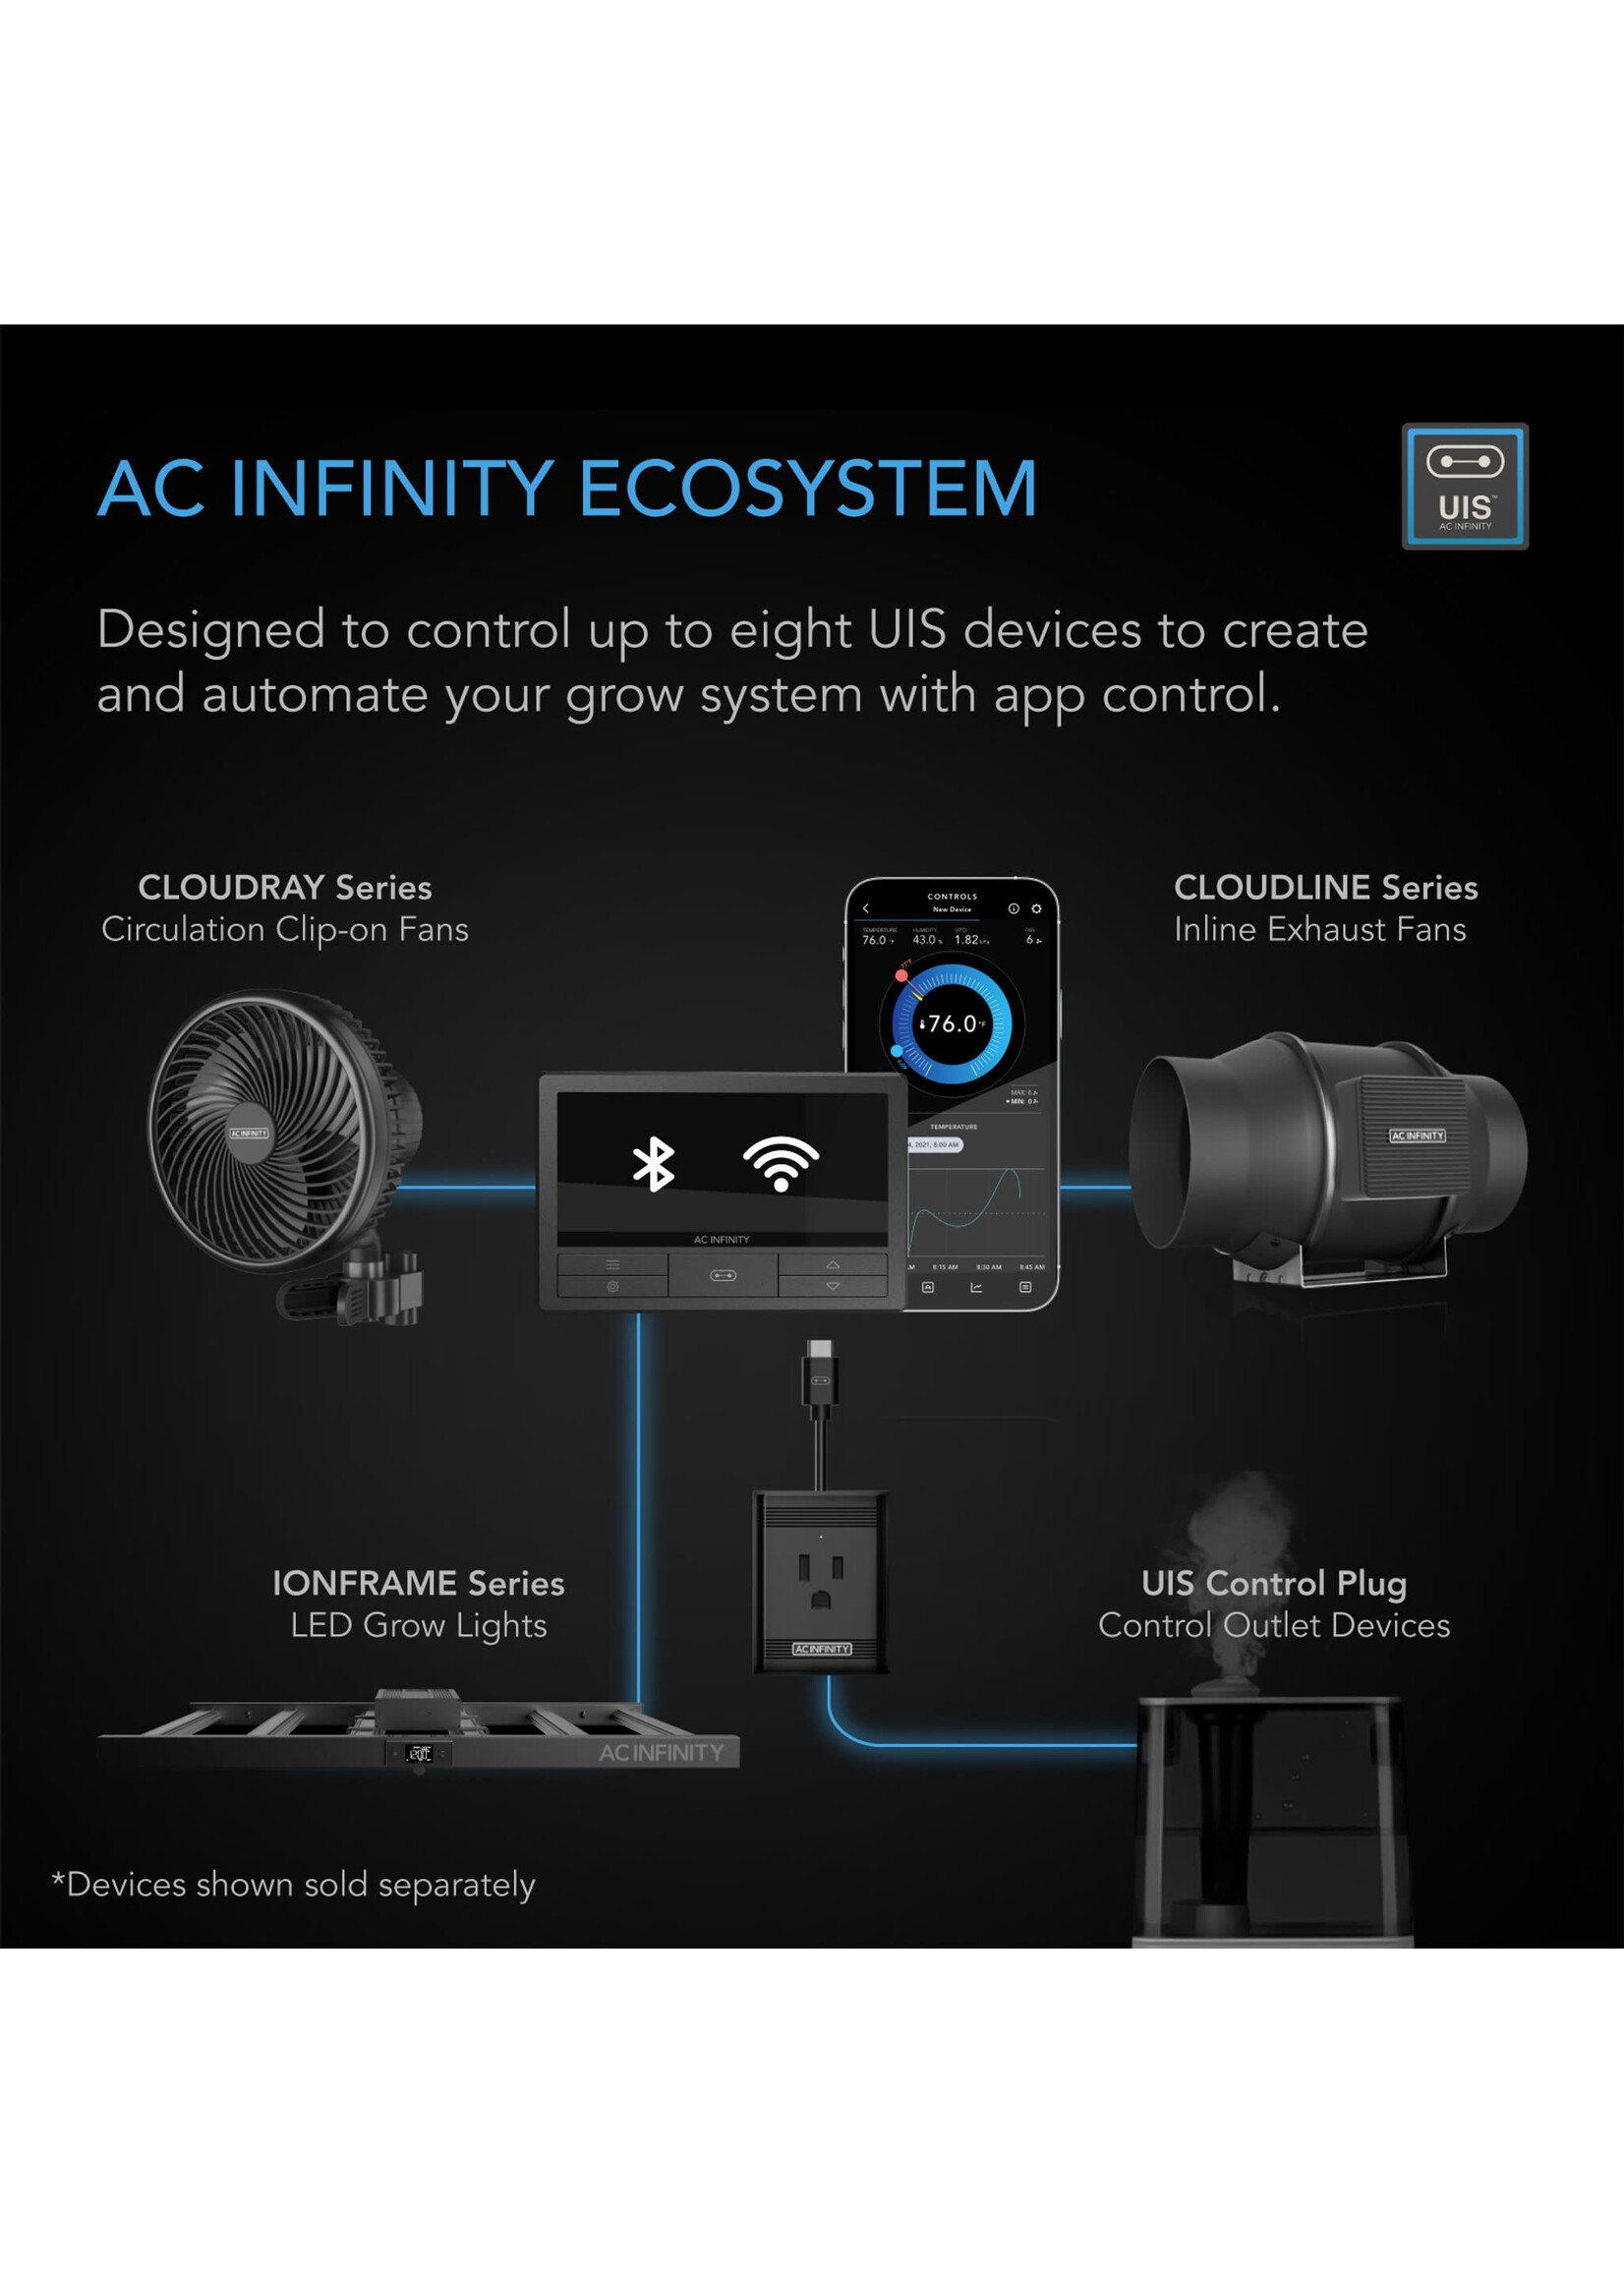 AC Infinity AC Infinity CONTROLLER 69 PRO+ INDEPENDENT PROGRAMS FOR EIGHT DEVICES, DYNAMIC VPD, TEMPERATURE, HUMIDITY, SCHEDULING, CYCLES, LEVELS CONTROL, DATA APP, BLUETOOTH + WIFI